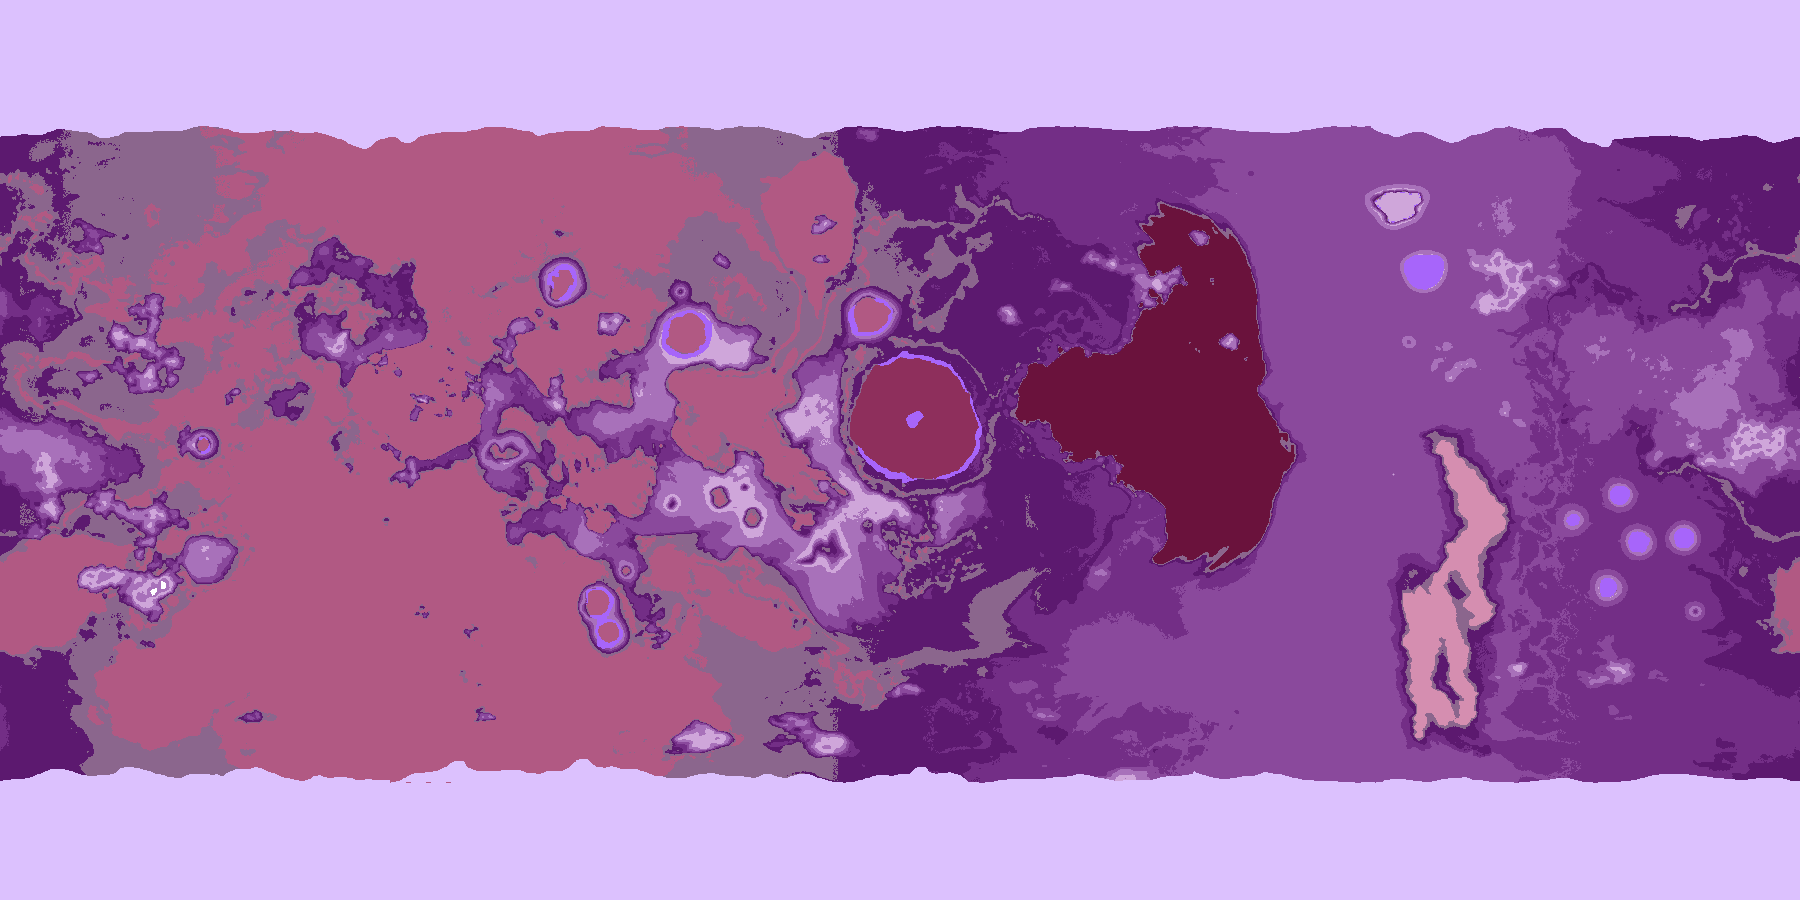 Eve_Biome_Map_1.2.png